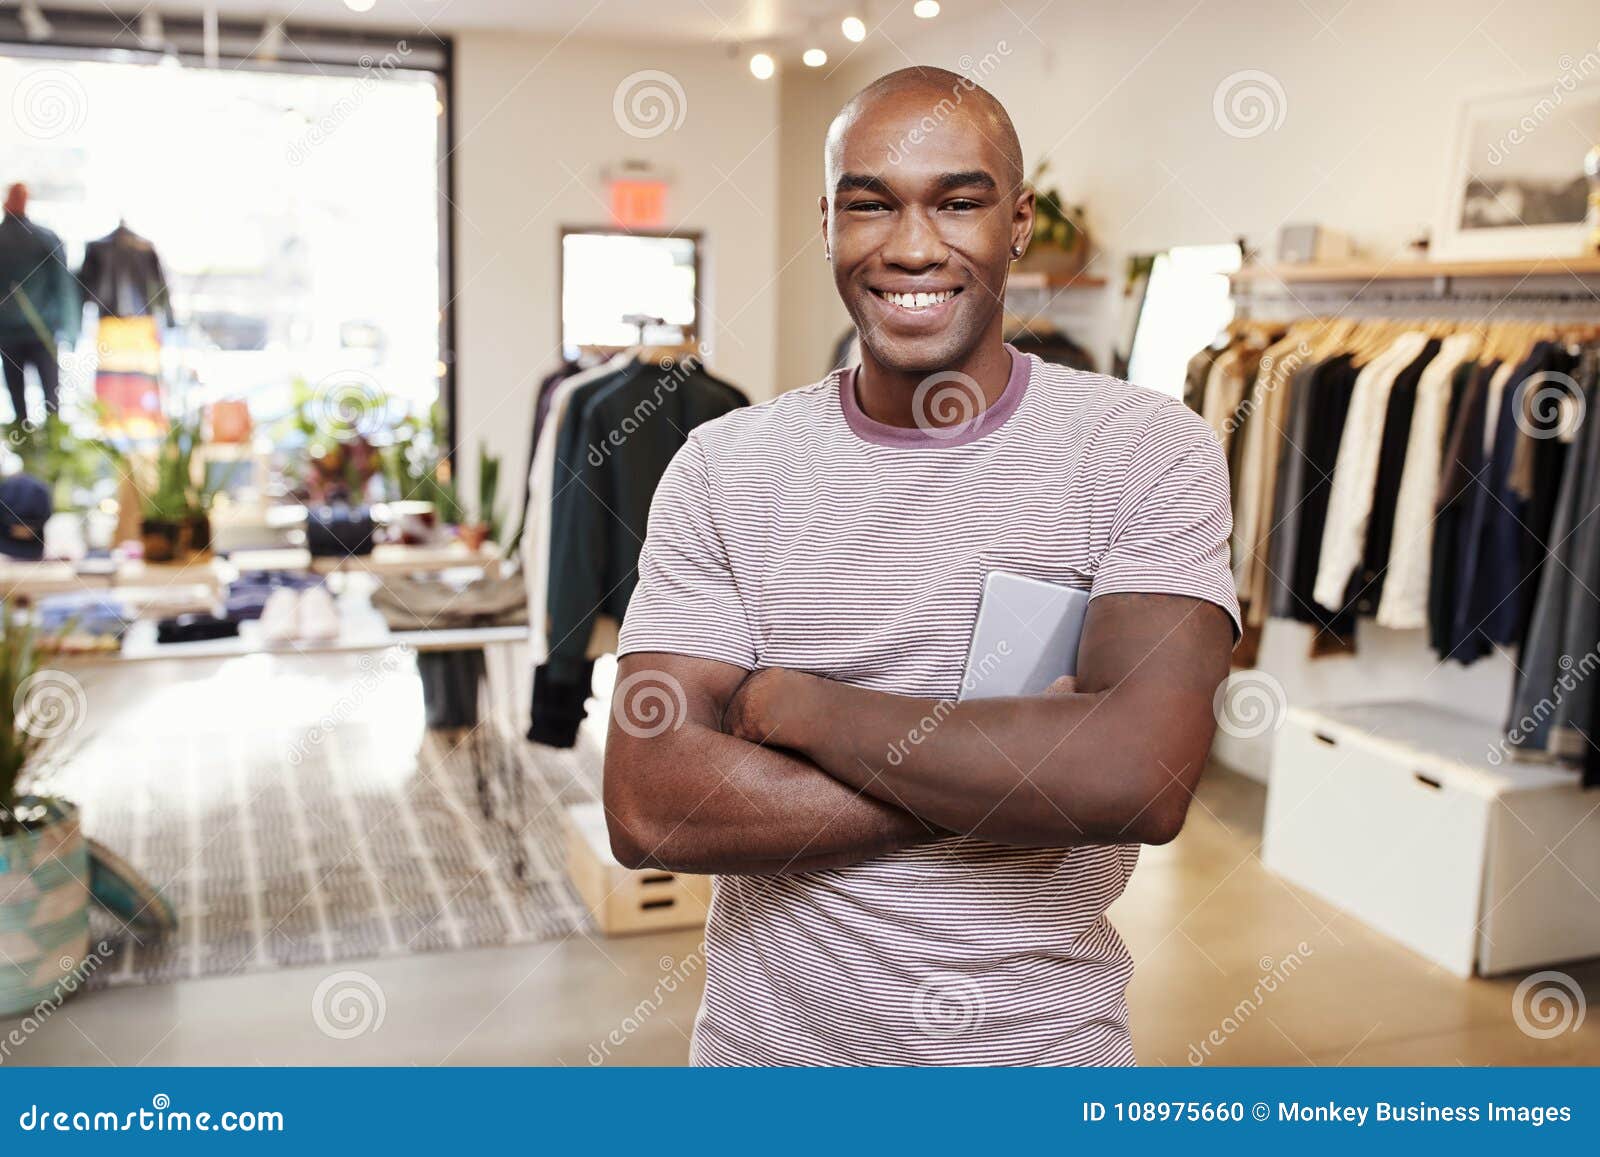 Young Black Man Smiling To Camera in a Clothes Shop Stock Photo - Image ...